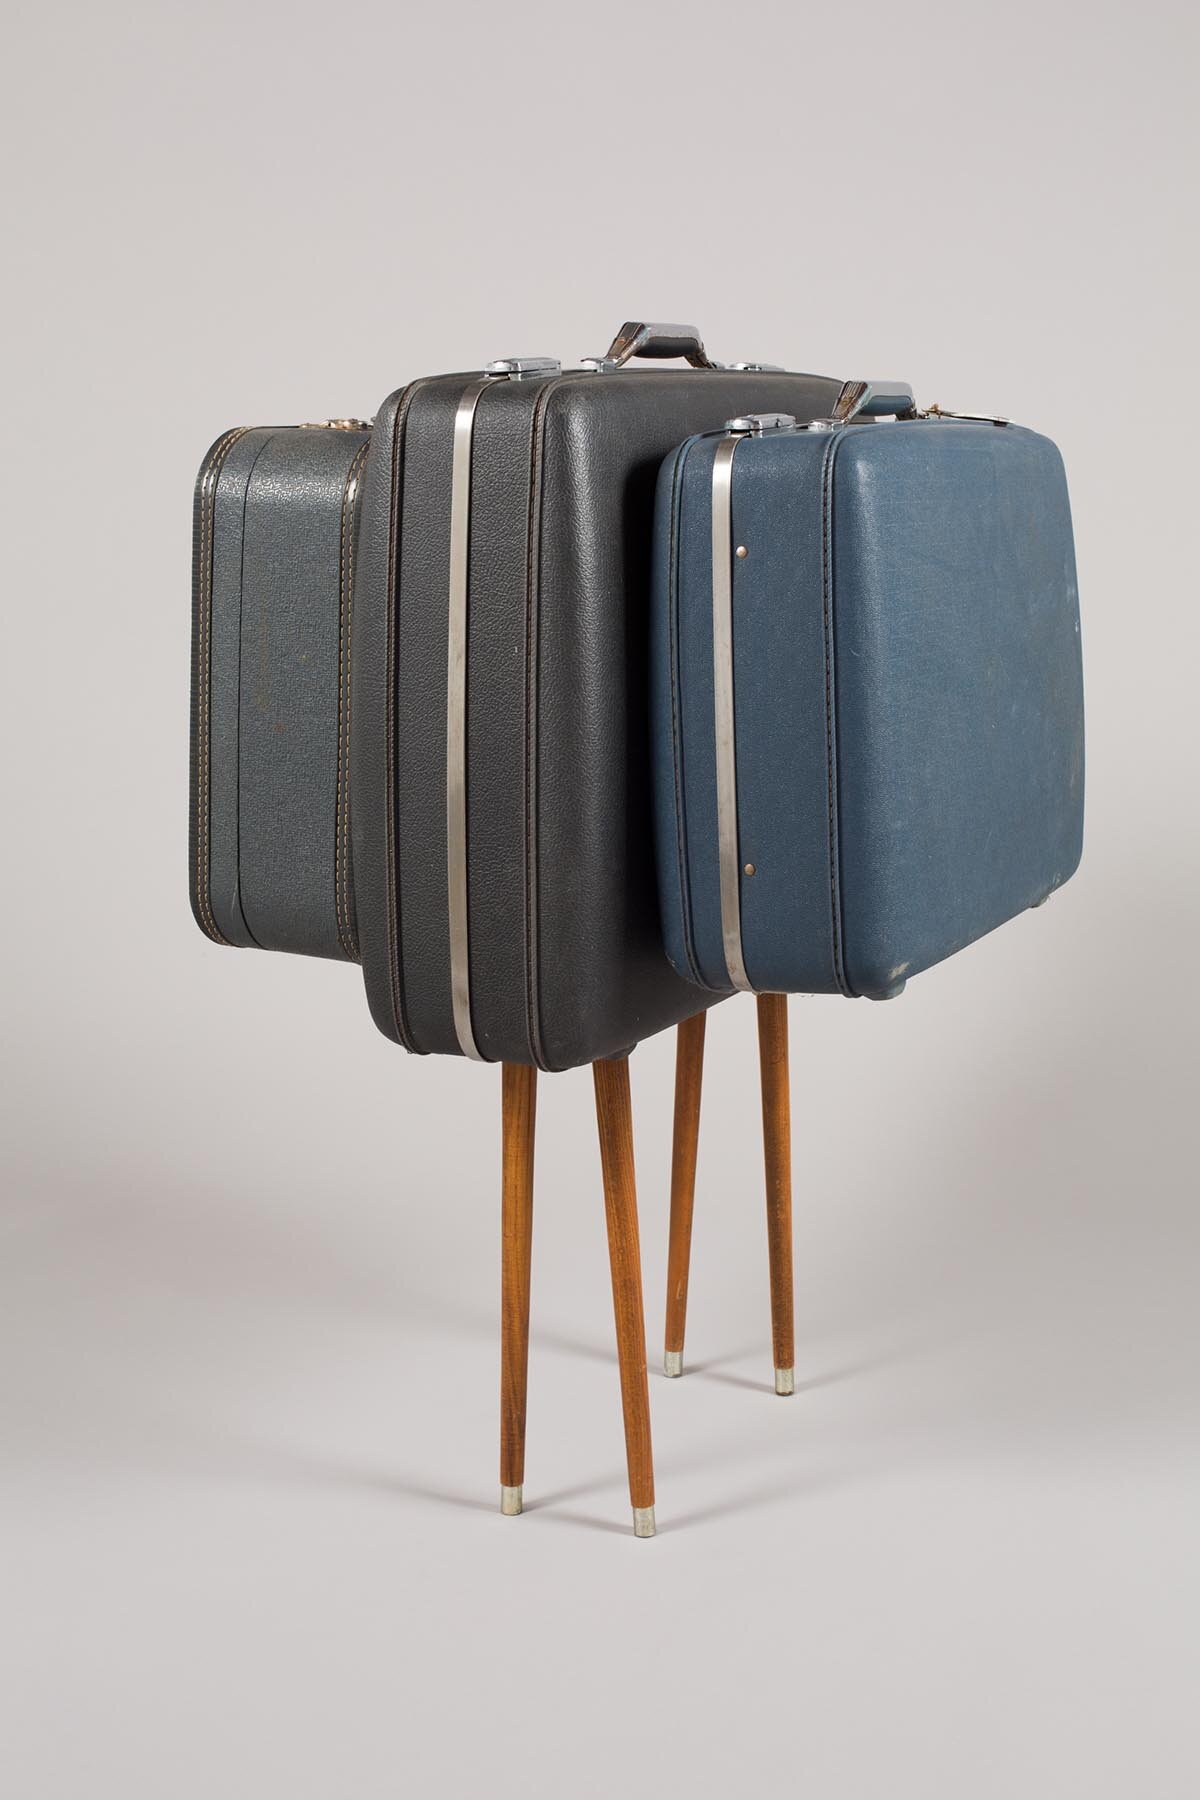   Mark Baugh-Sasaki, Mule Suitcases and wooden legs 40” x 36” x 30” 2019  